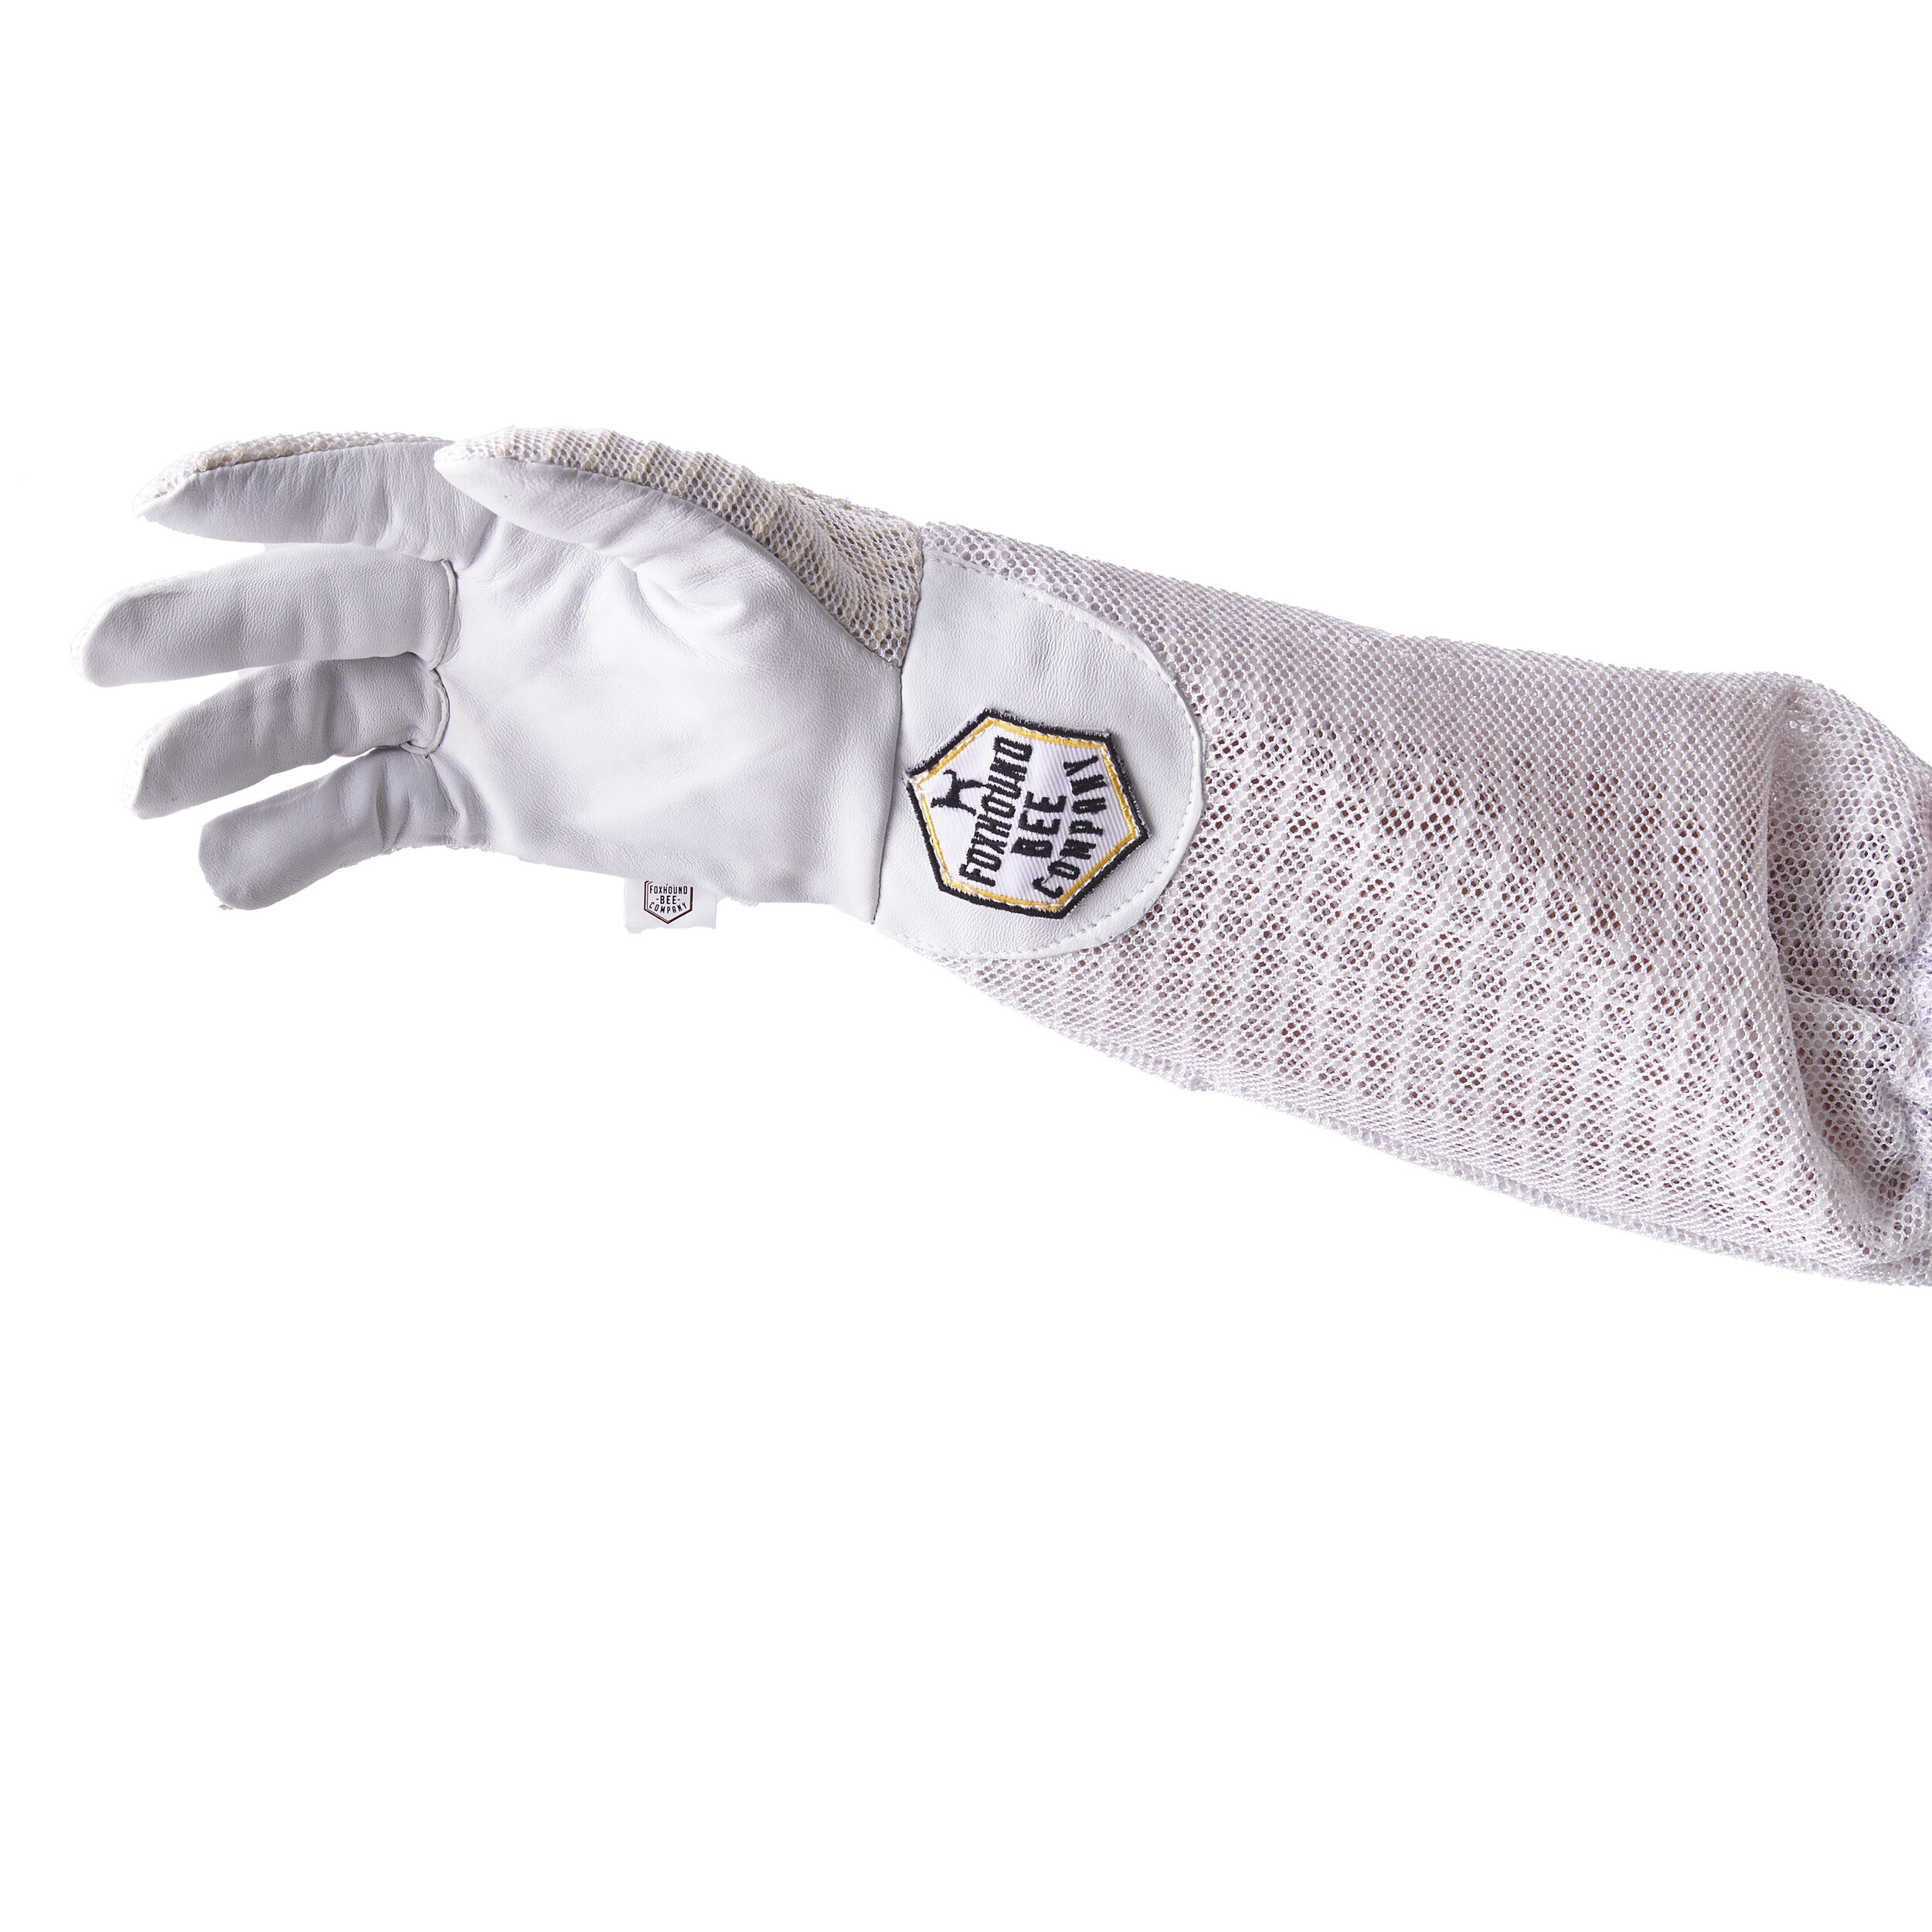 Fully Ventilated Goat Skin Beekeeping Gloves Foxhound Bee Company,Cellulose In Food Definition